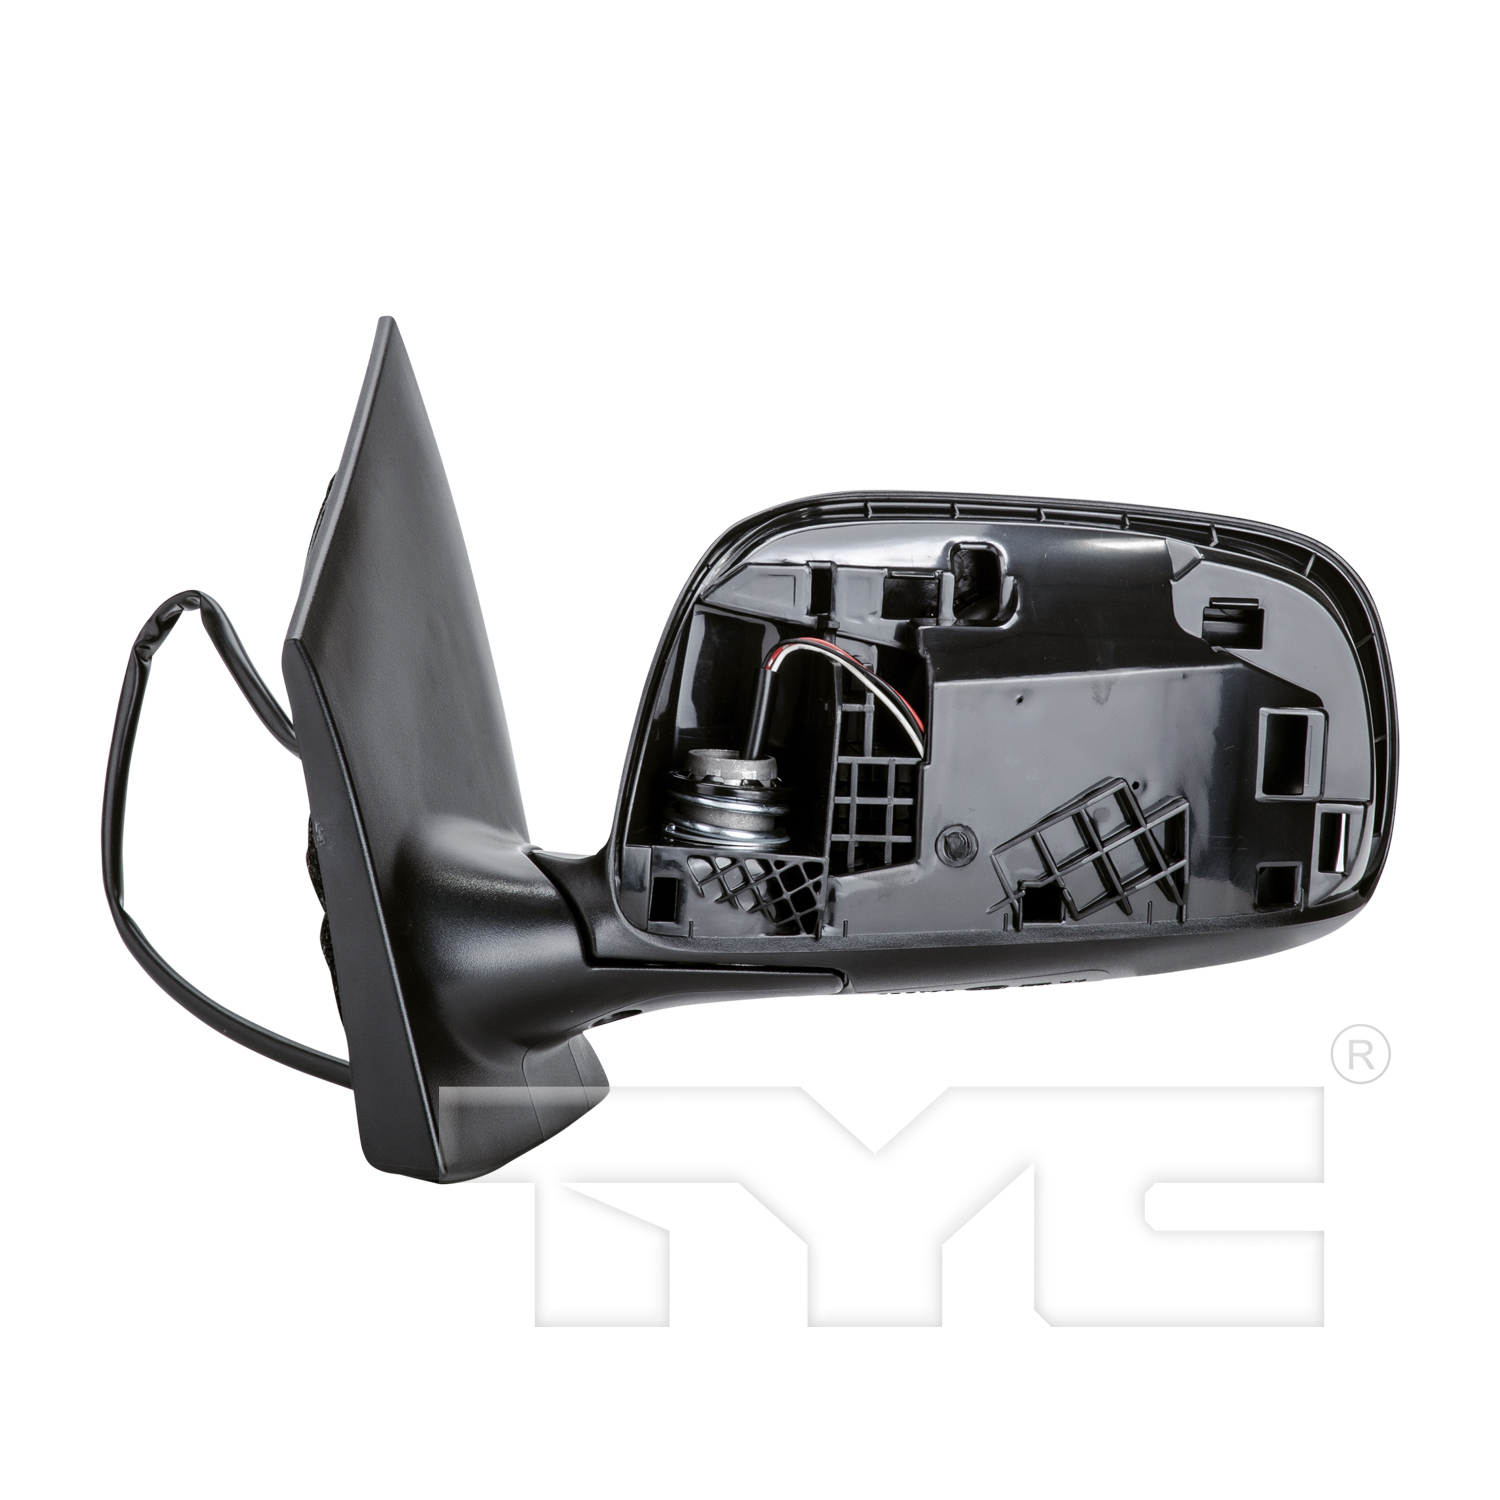 Aftermarket MIRRORS for TOYOTA - YARIS, YARIS,07-12,LT Mirror outside rear view